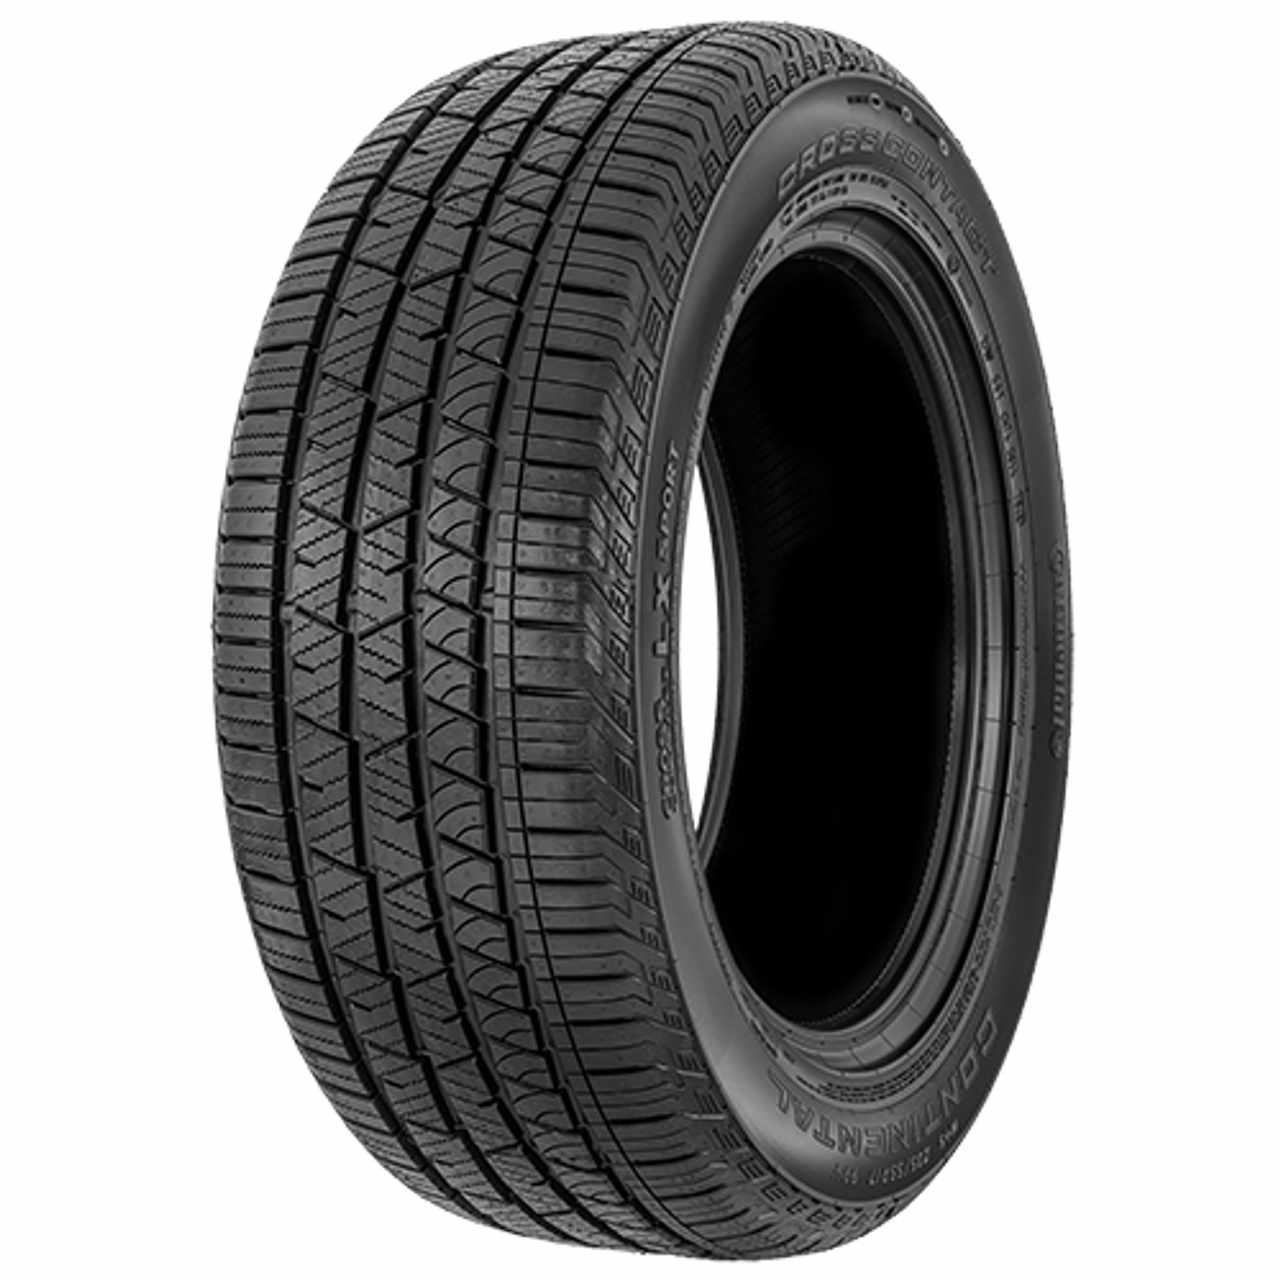 CONTINENTAL CROSSCONTACT LX SPORT (EVc) 255/60R18 112V FR BSW